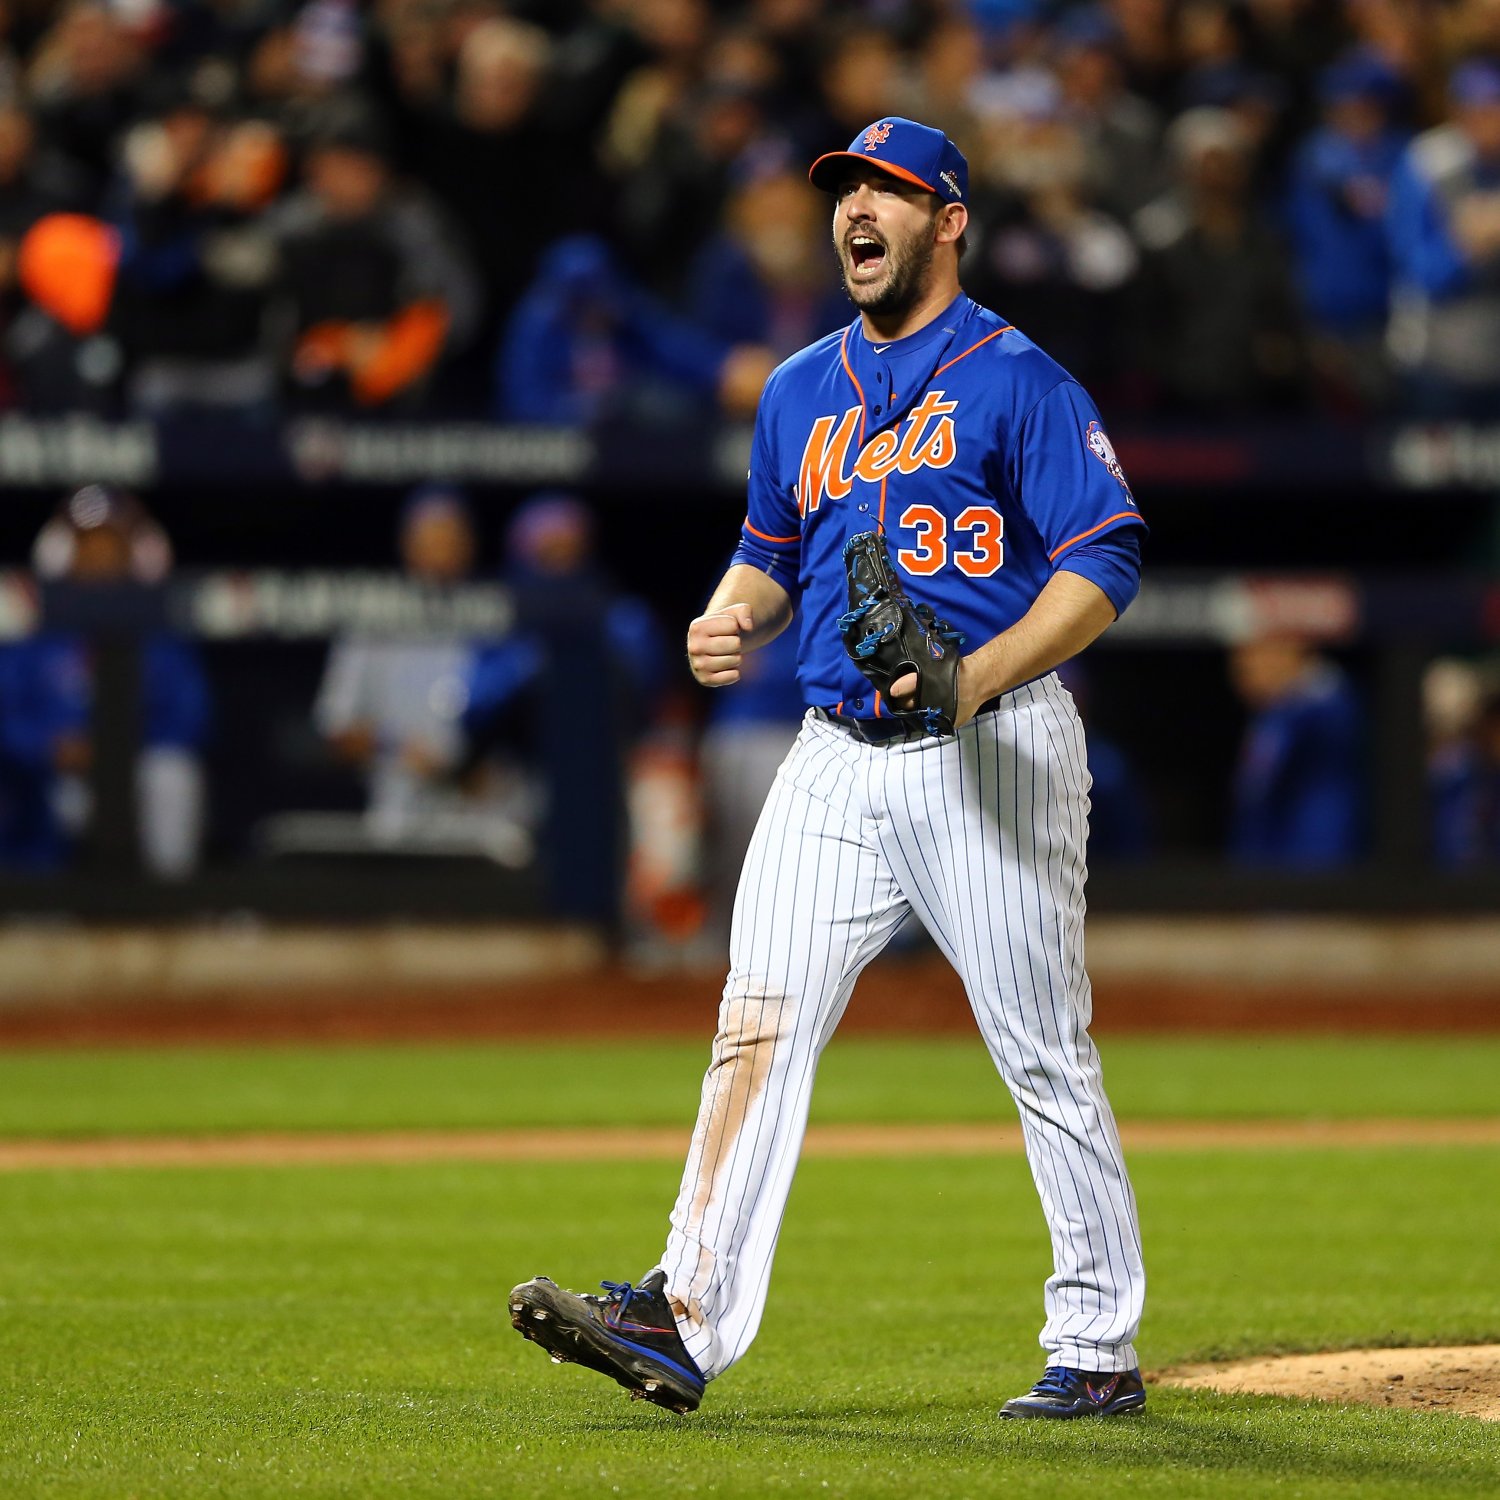 Cubs vs. Mets Game 1 Live NLCS Score and Highlights Bleacher Report